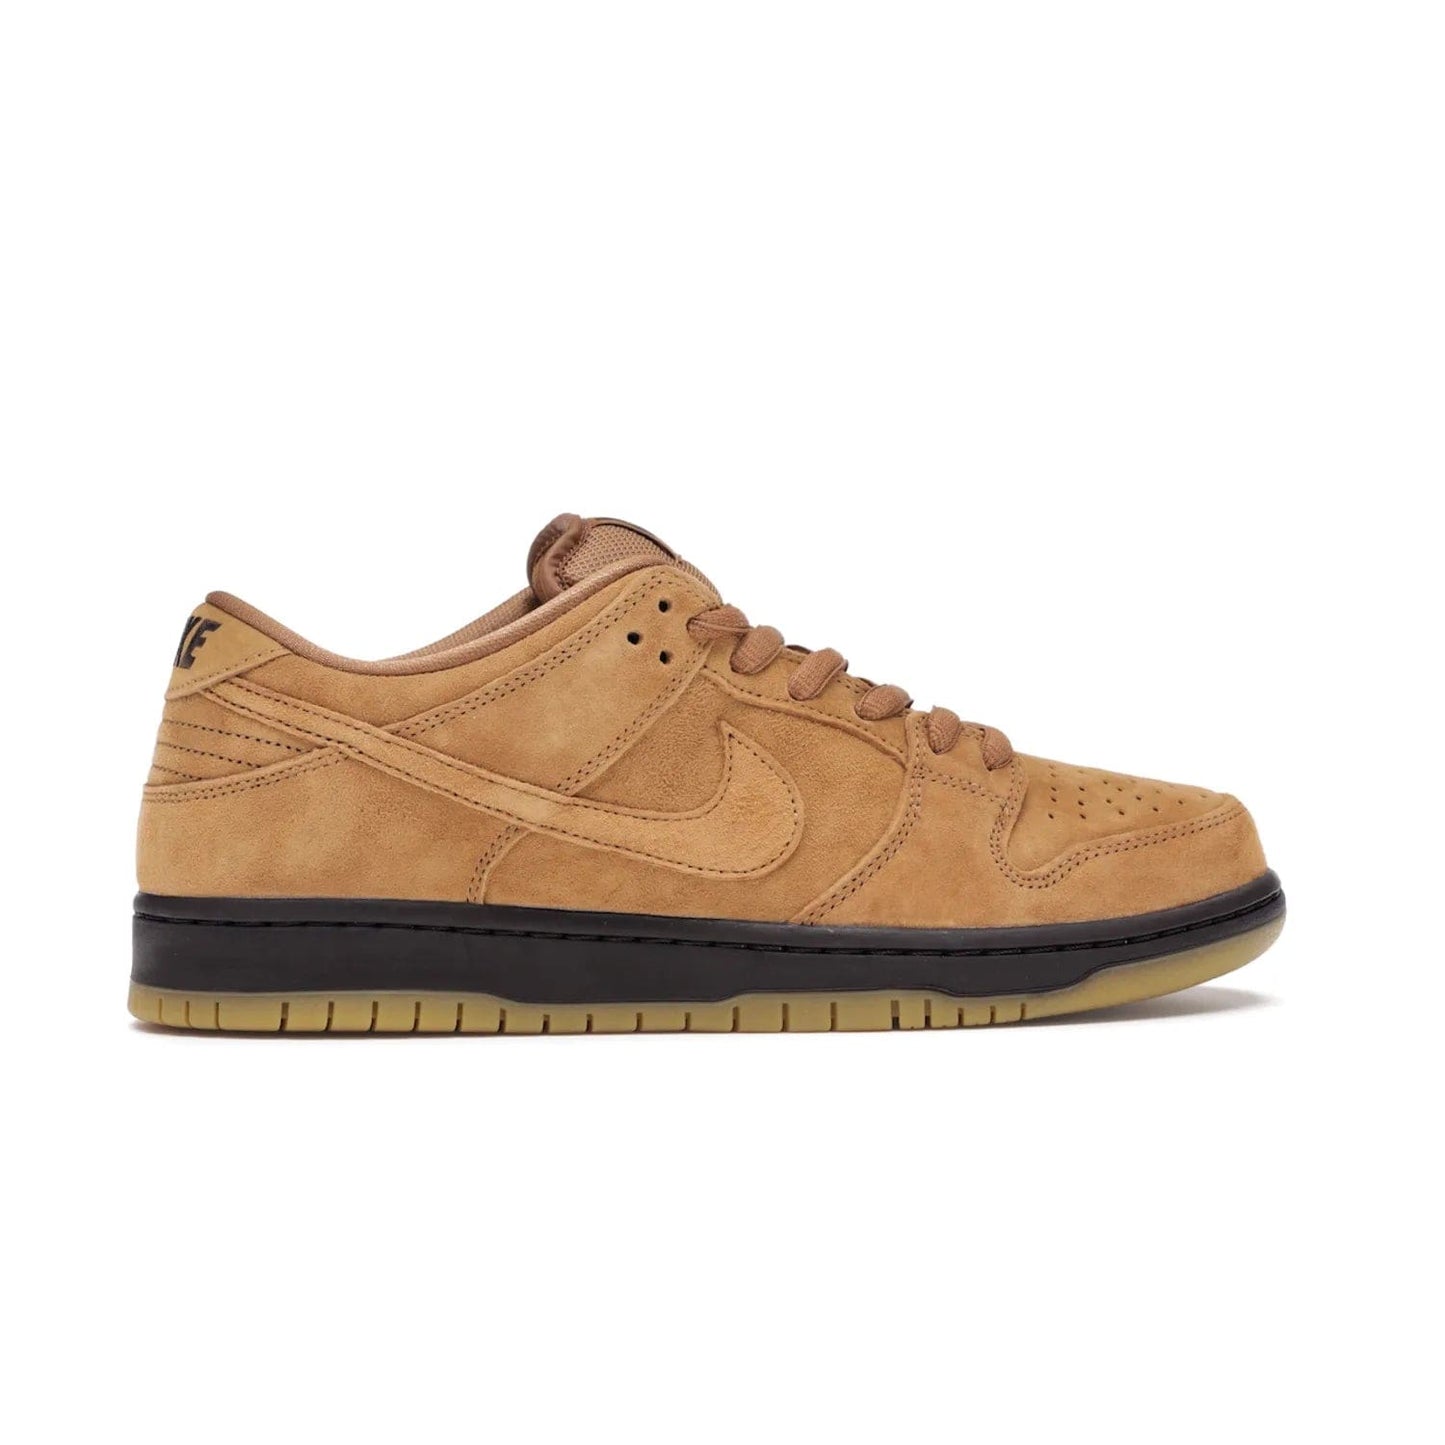 Nike SB Dunk Low Wheat (2021/2023) - Image 36 - Only at www.BallersClubKickz.com - The Nike SB Dunk Low Wheat (2021/2023)has a sleek silhouette and wheat suede upper. Tan tones for lining, mesh tongues, and laces. Iconic color palette midsole, perforated boxing toe. Brown branding on tongue and heel. Gum rubber outsole with partitioned pattern for traction. Eschewed in Feb 2021 for $110.